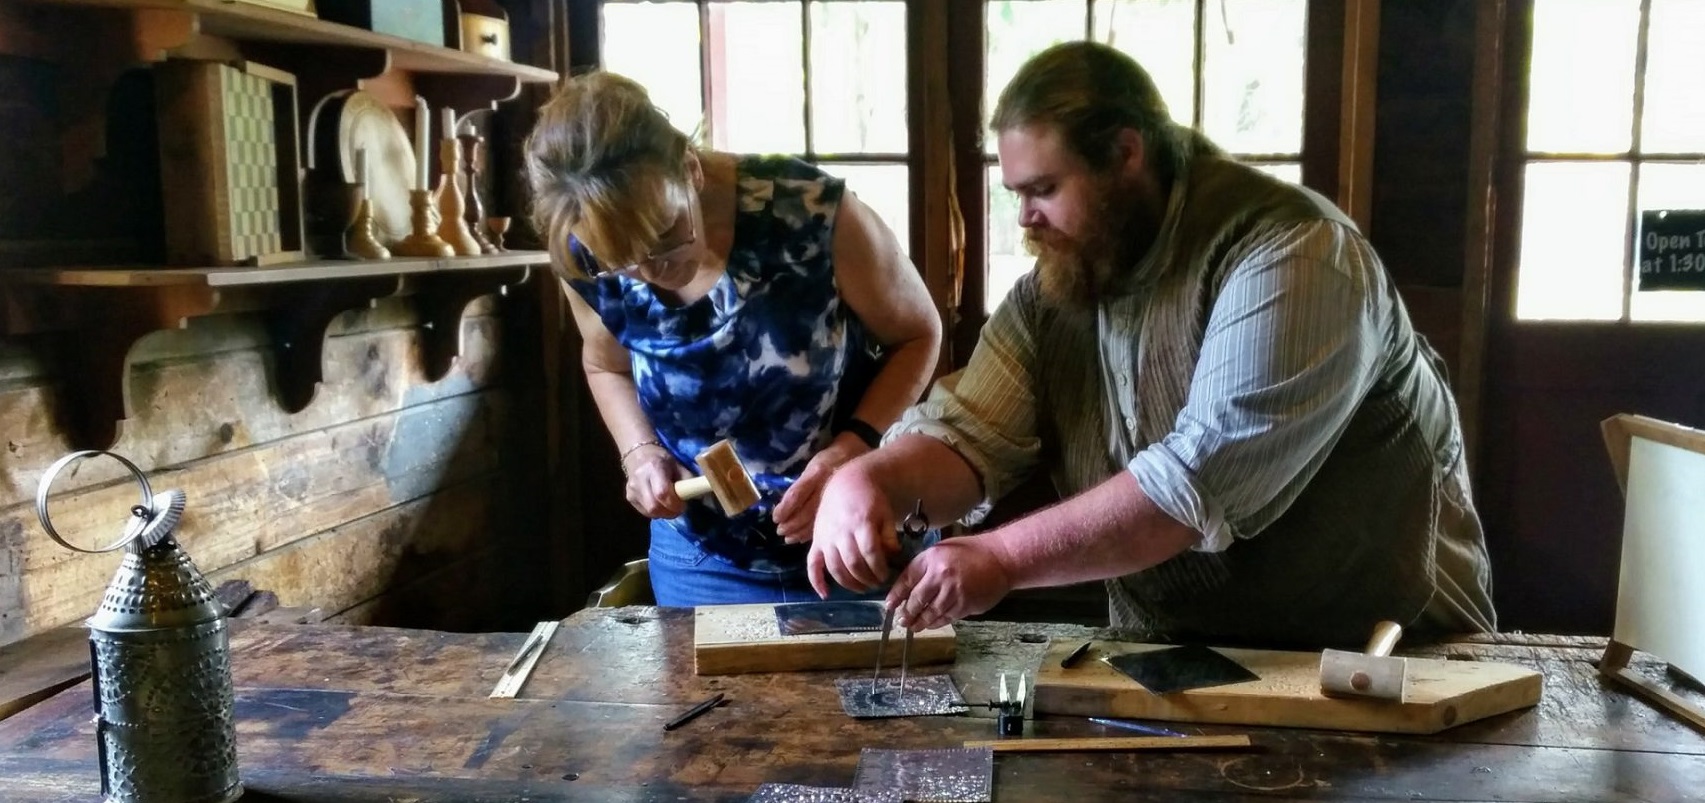 woman learns tinsmithing skills from instructor in DIY Heritage Trades workshop at Black Creek Pioneer Village